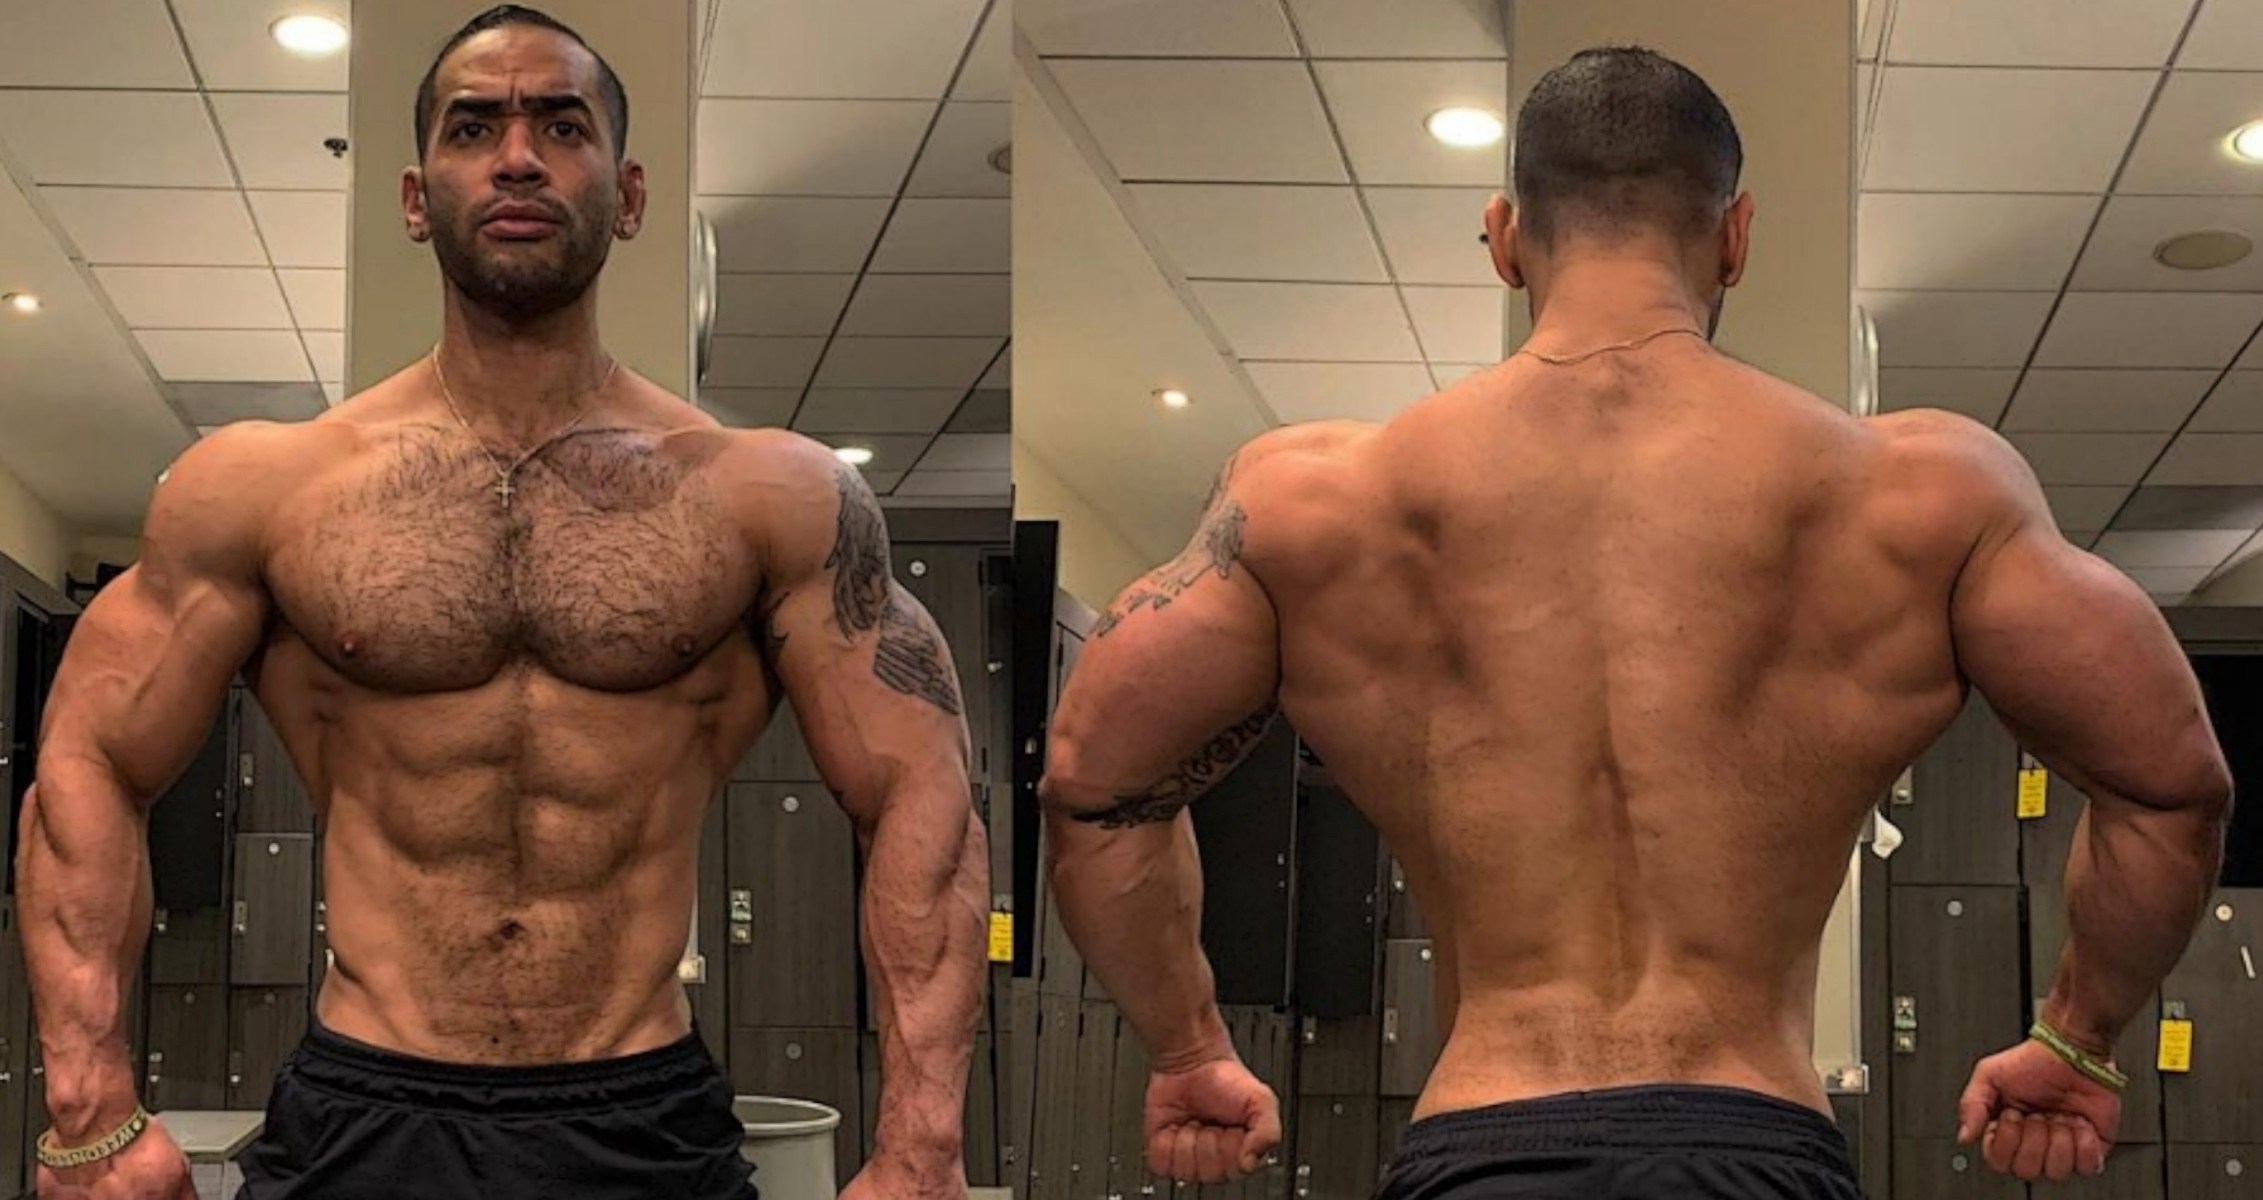 IFBB Pro Classic Physique Bodybuilder Jamie LeRoyce Goes Natural